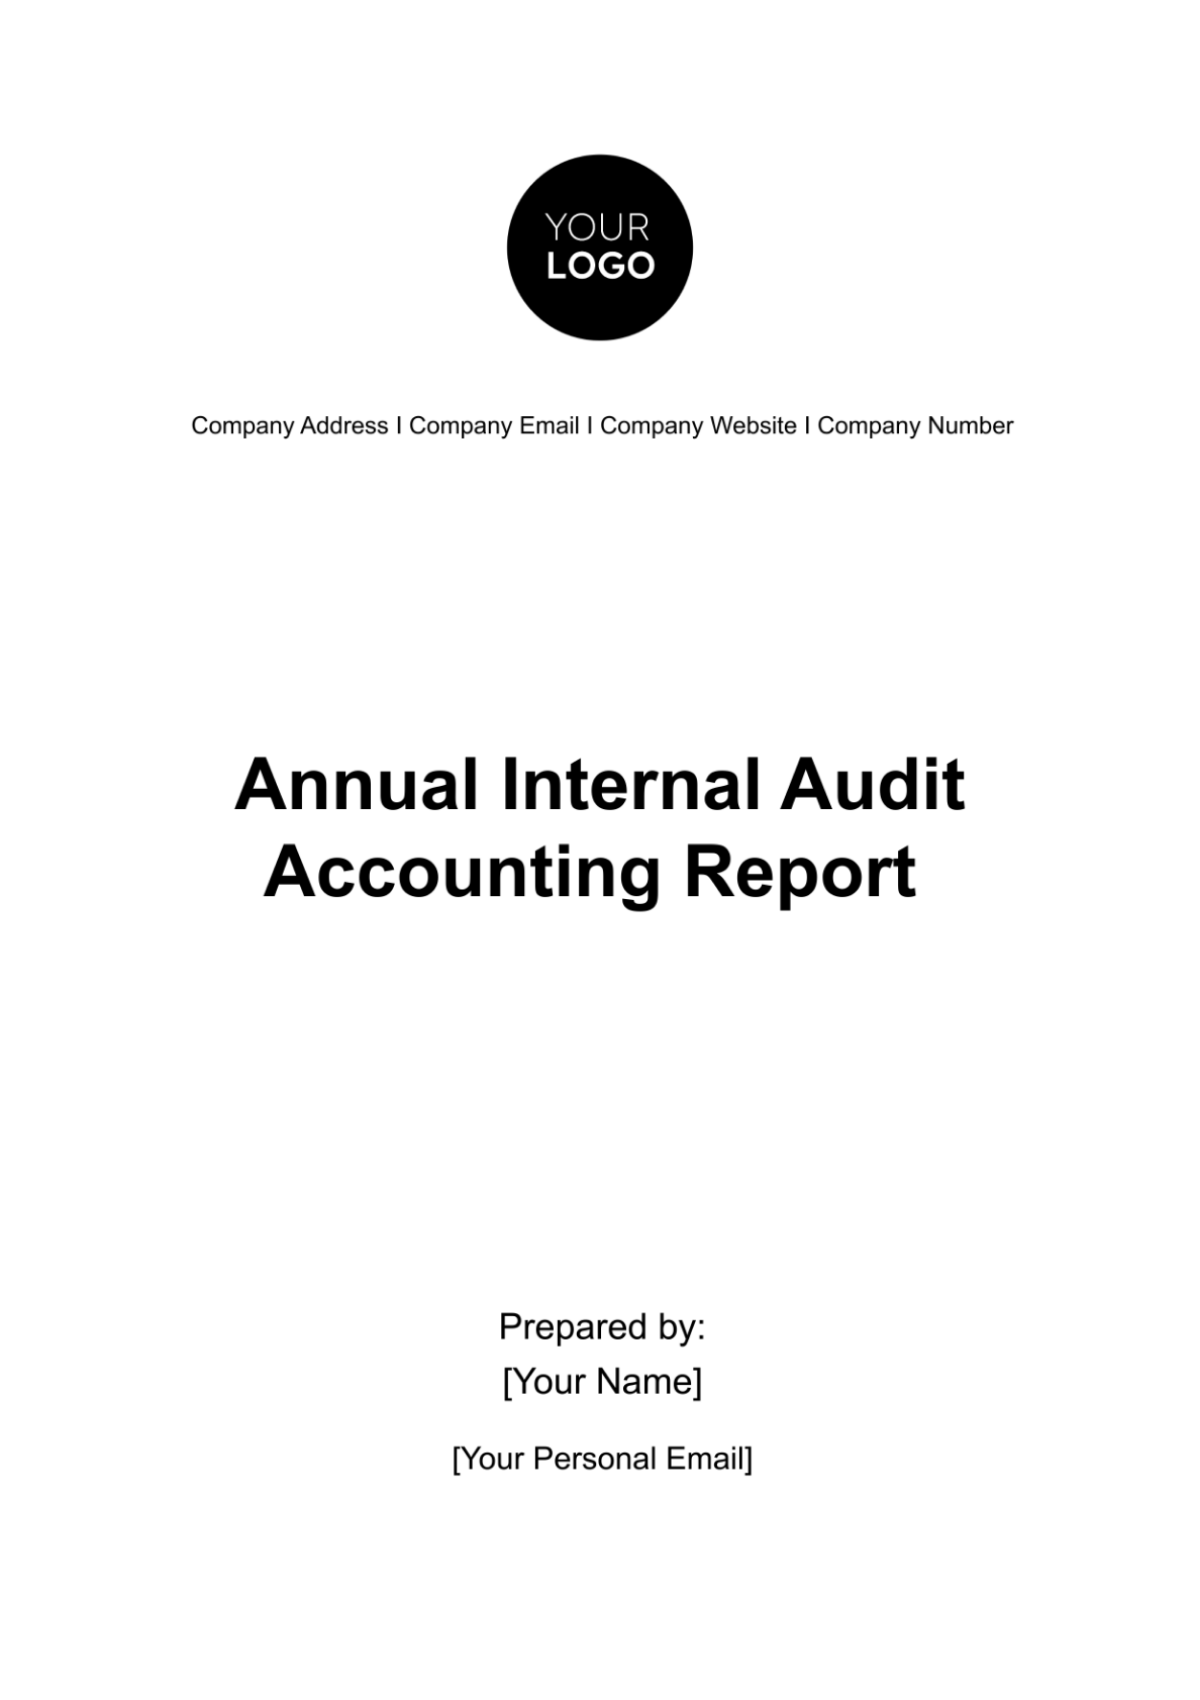 Annual Internal Audit Accounting Report Template